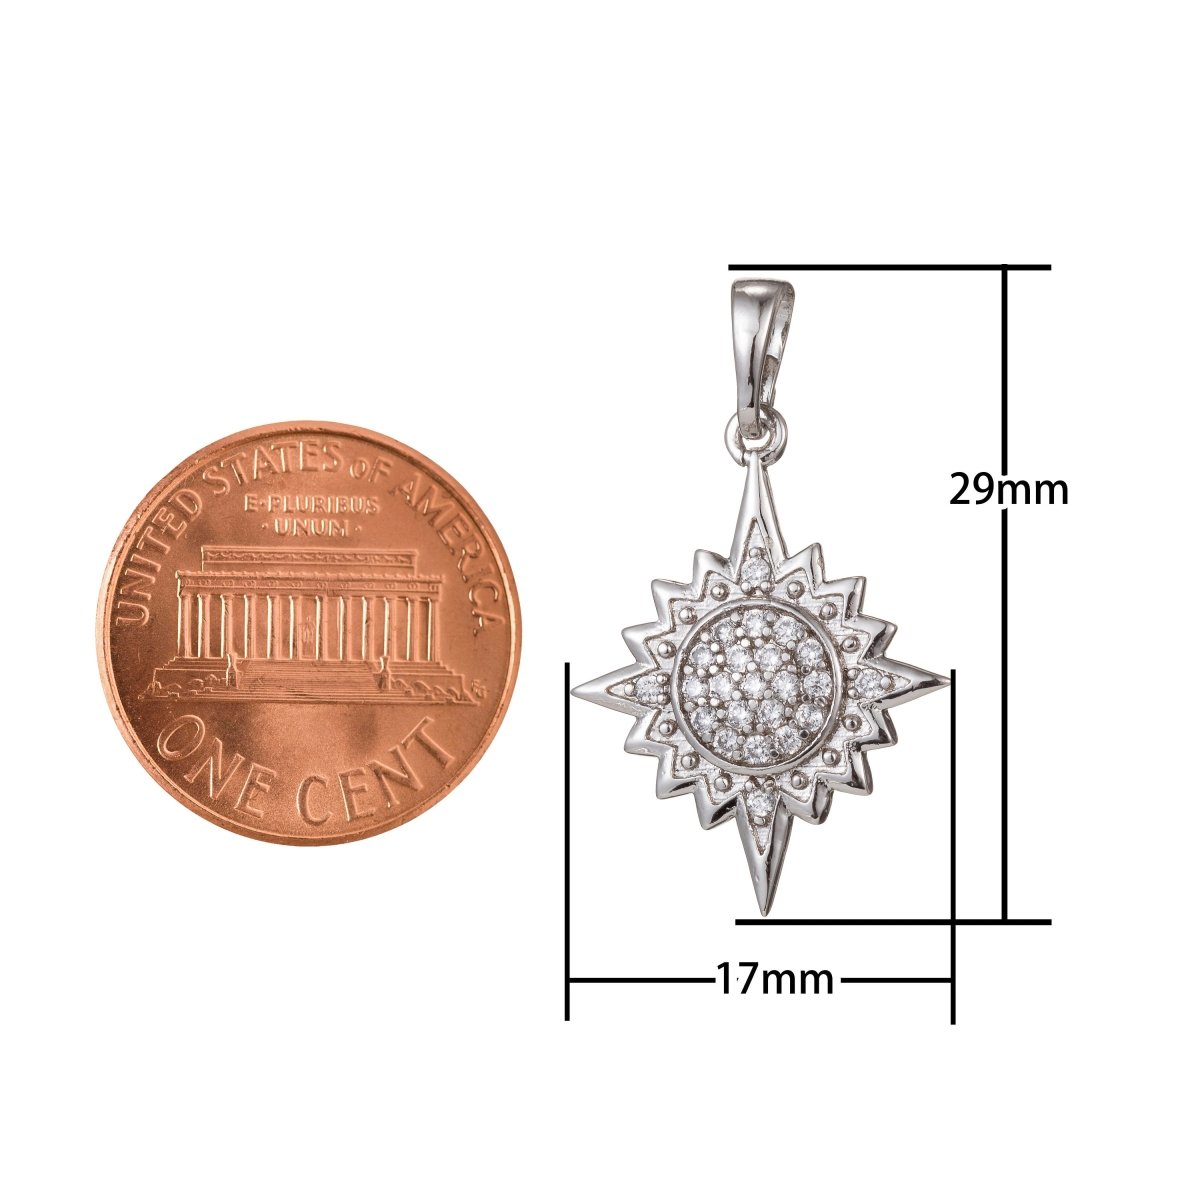 White Gold Filled Micro Pave CZ North Star Pendant Charm, North Star Pendant Charm, White Gold Star Pendant, For DIY Jewelry I-502 - DLUXCA